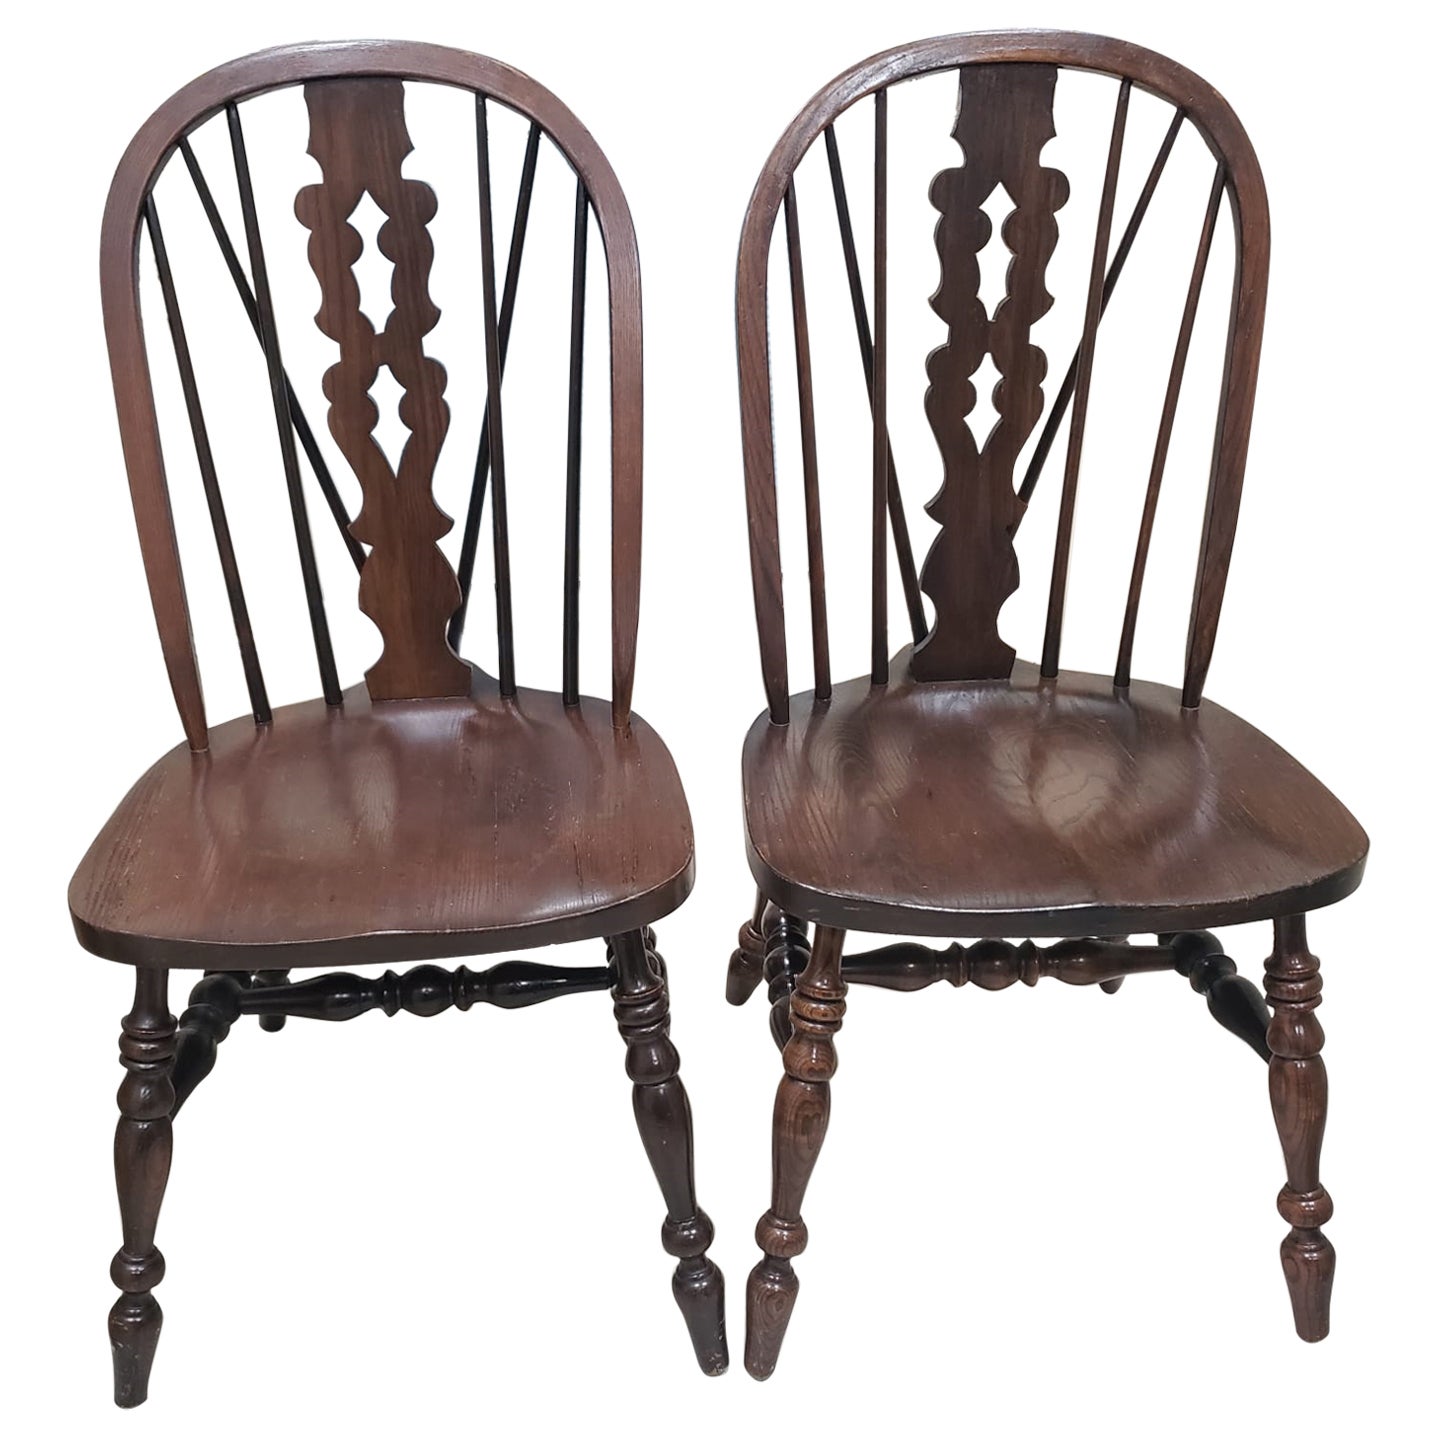 Pennsylvania House Solid Oak Fiddle Back Brace Back Chairs, A pair